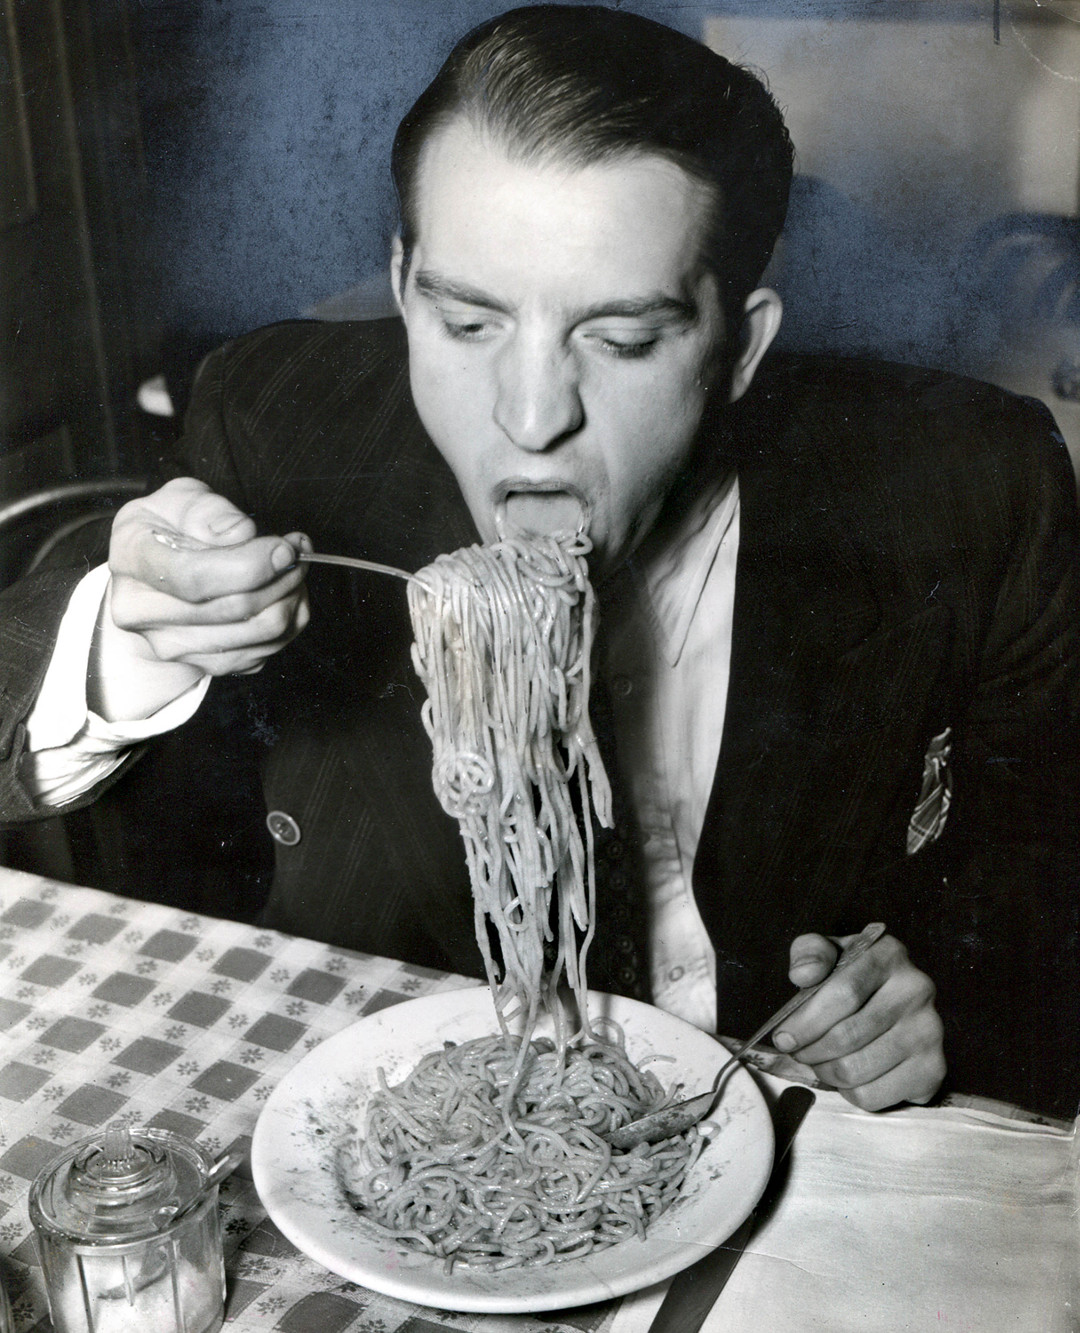 Weegee, Phillip J. Stazzone Is on WPA and Enjoys His Favourite Food as He’s Heard That the Army Doesn’t Go in Very Strong for Serving Spaghetti, 1940.